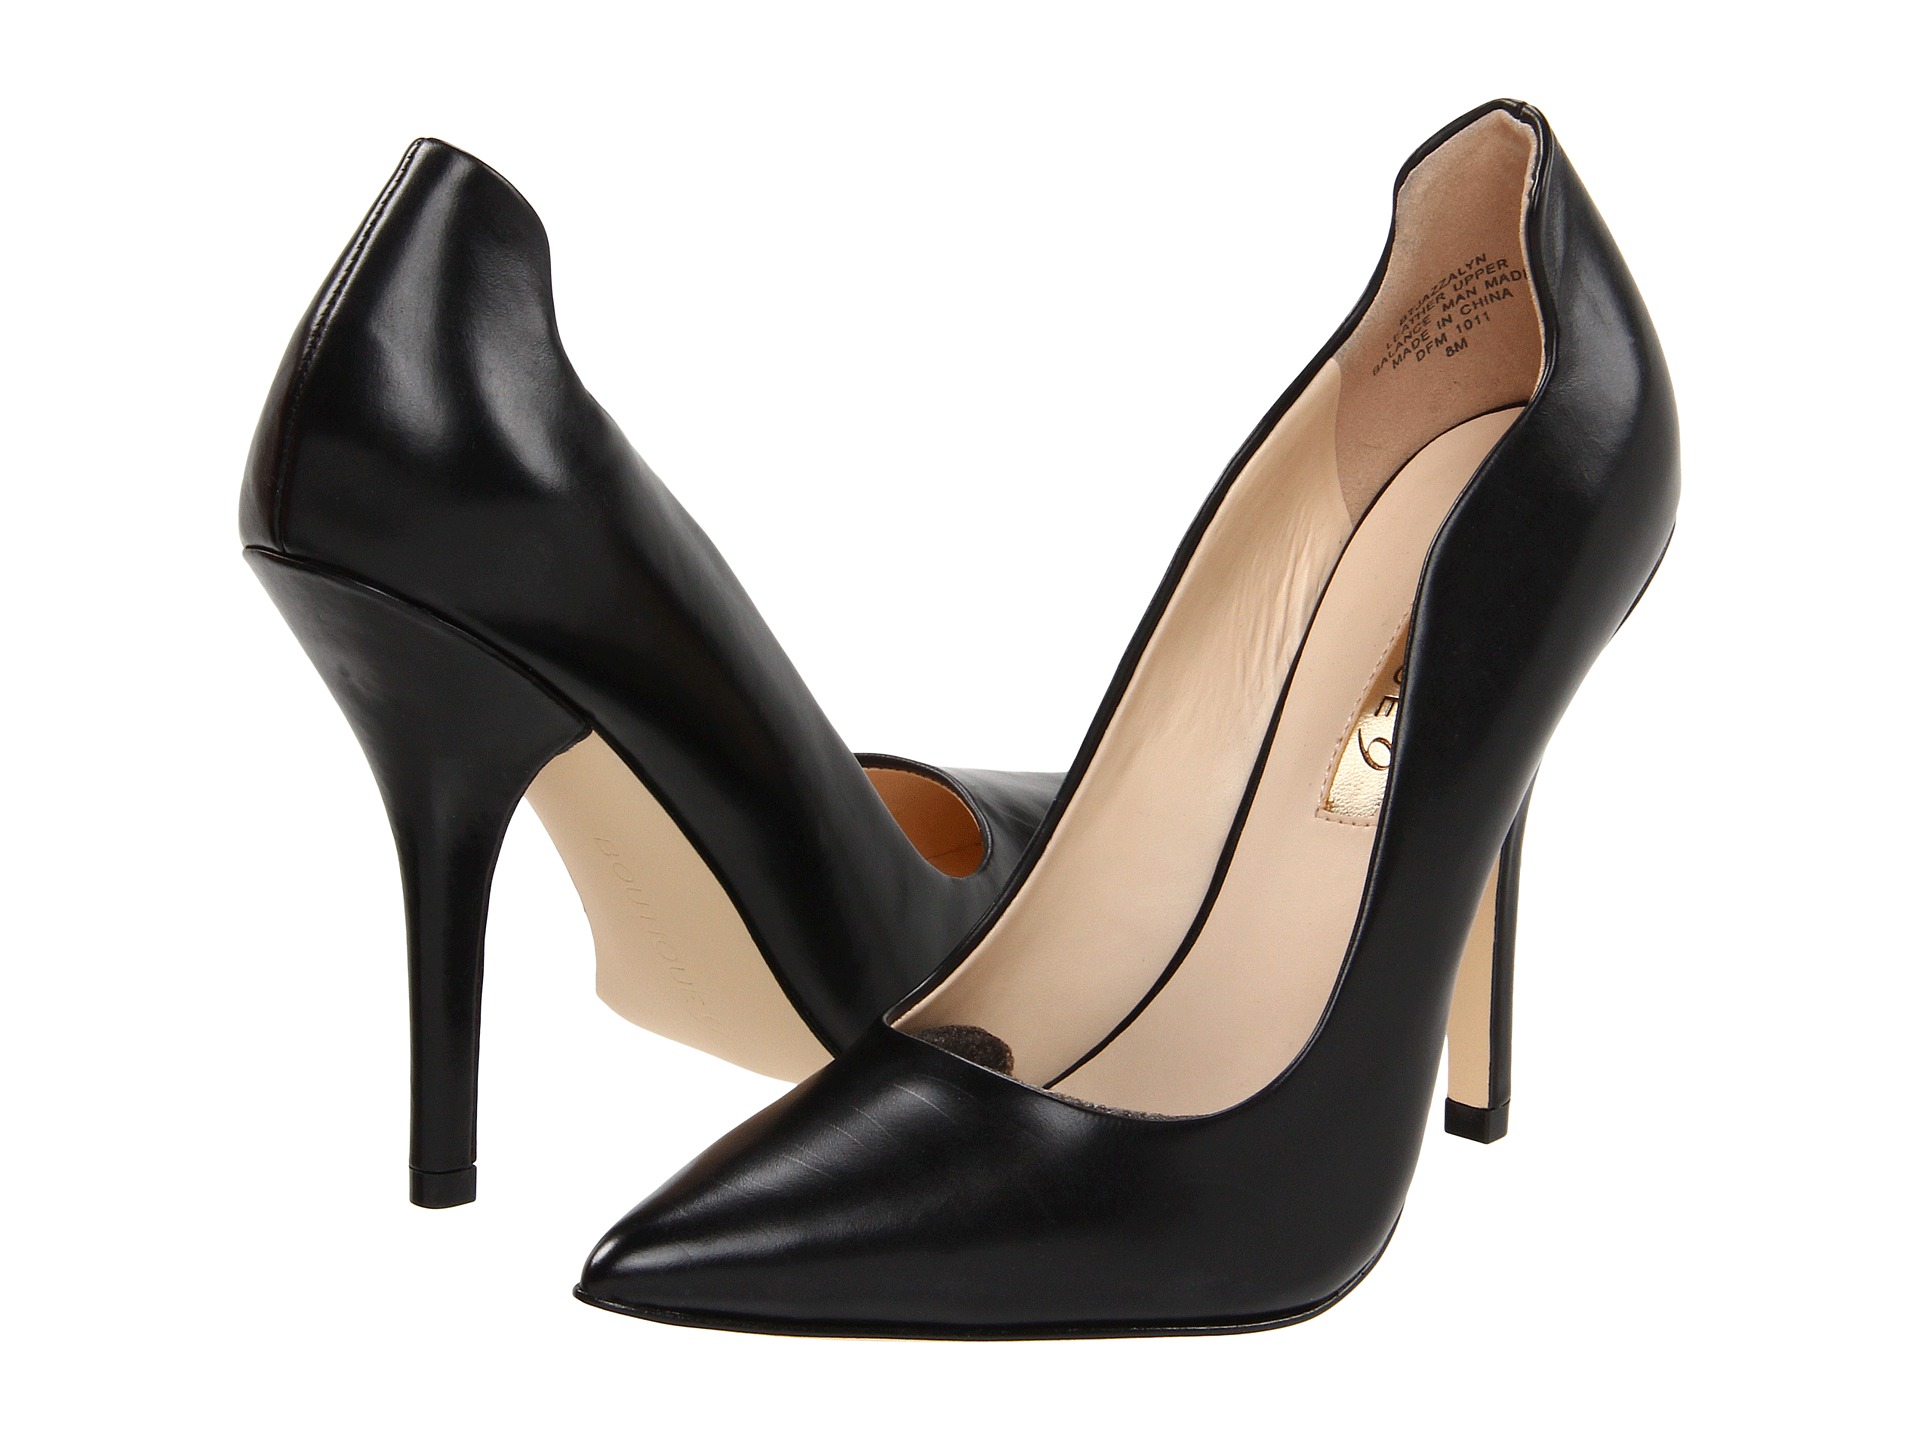 black work pumps: comfortable, pointy 